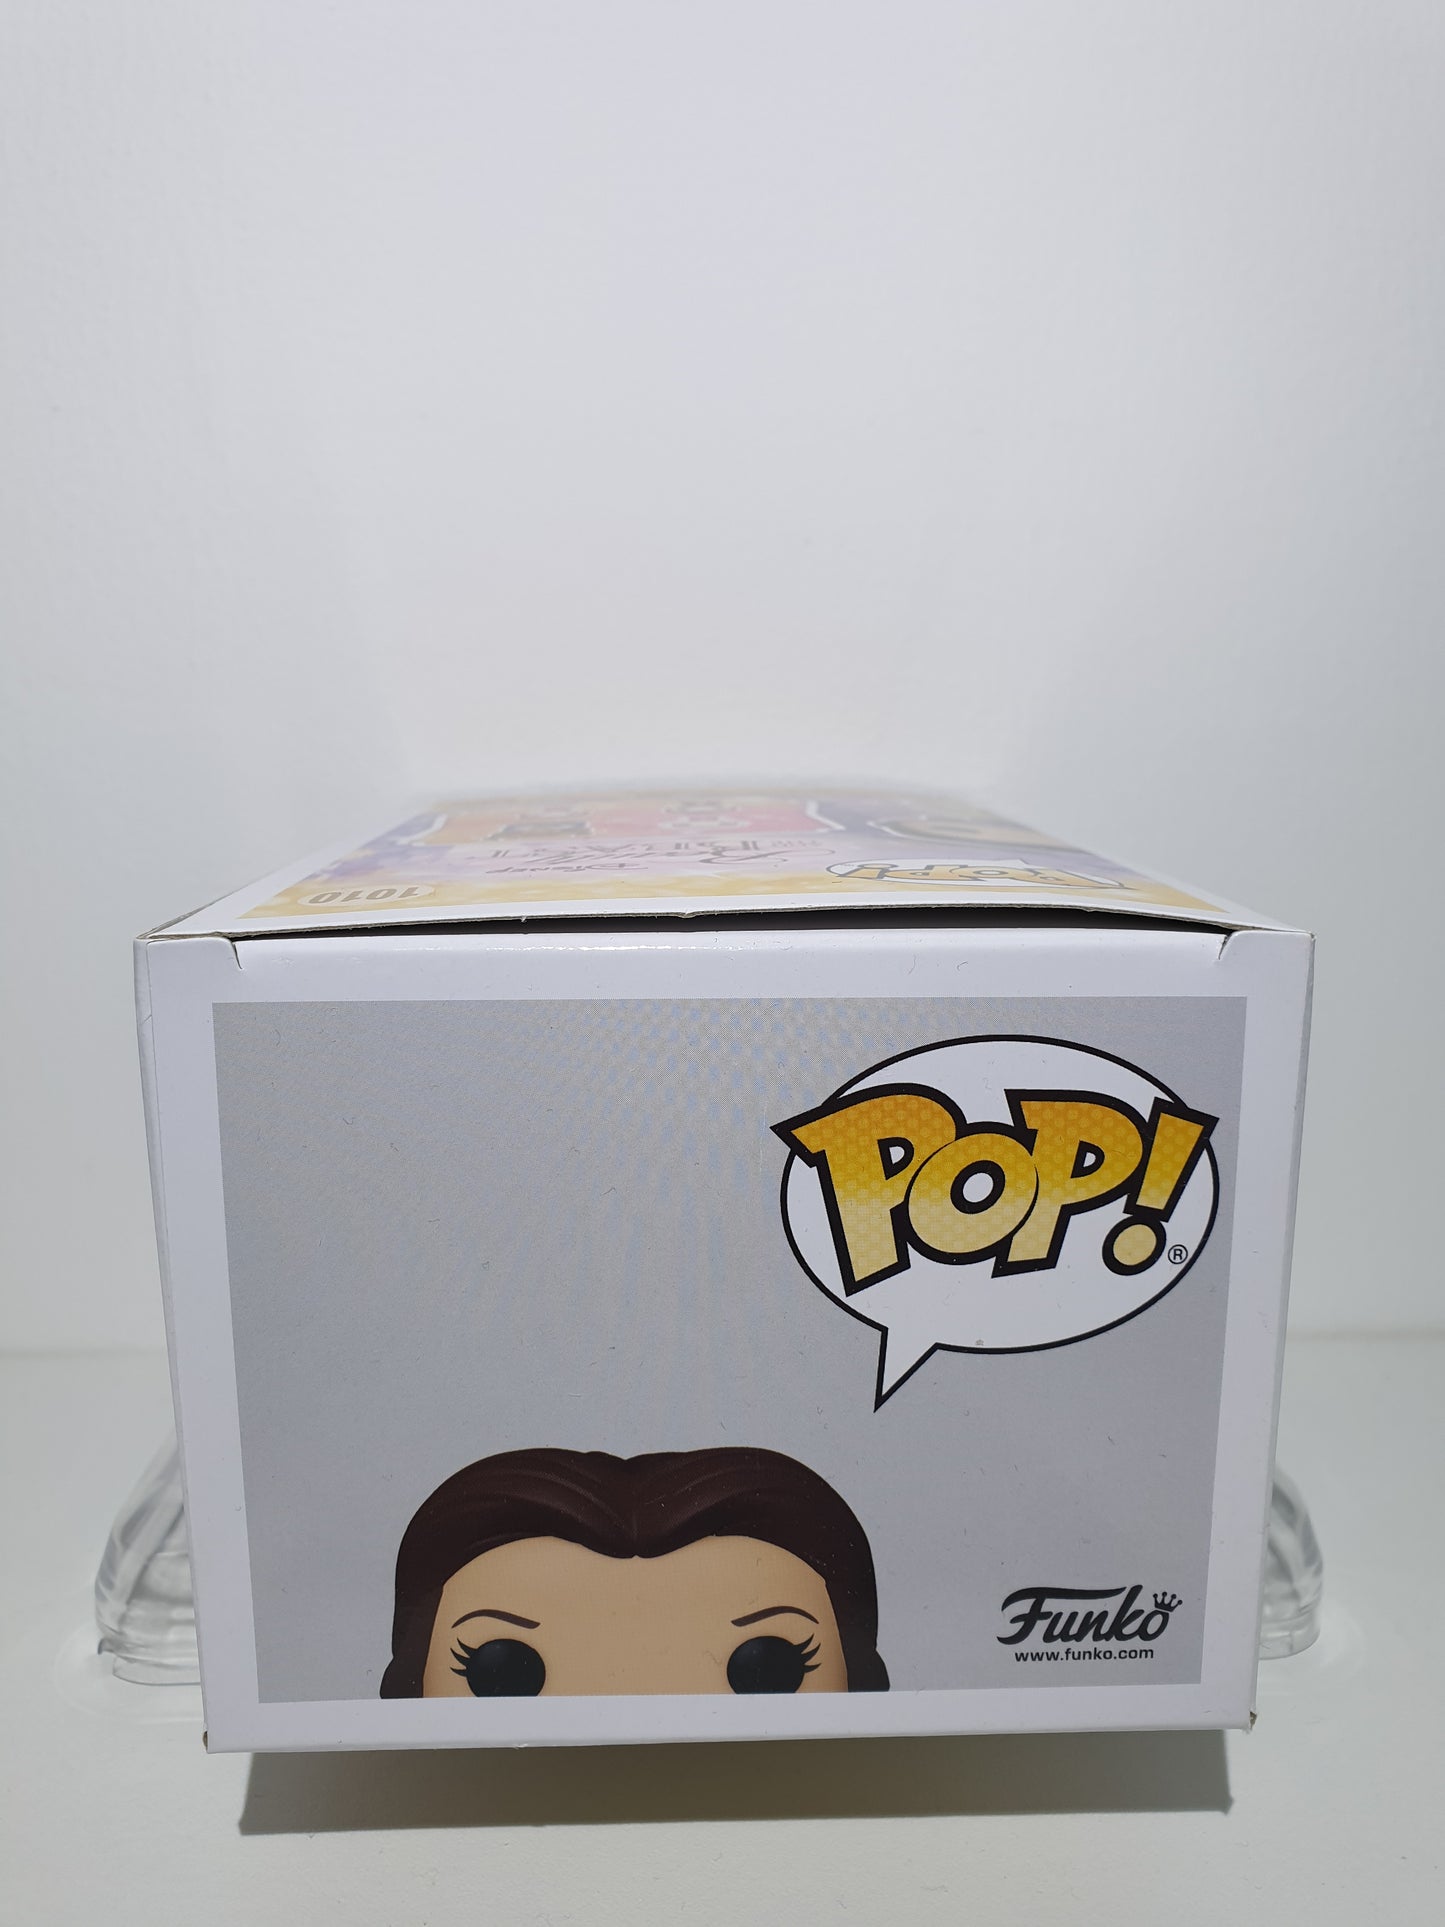 FUNKO POP 1010 - DISNEY - BEAUTY AND THE BEAST - BELLE - 2021 SPRING CONVENTION EXCLUSIVE - NEUF